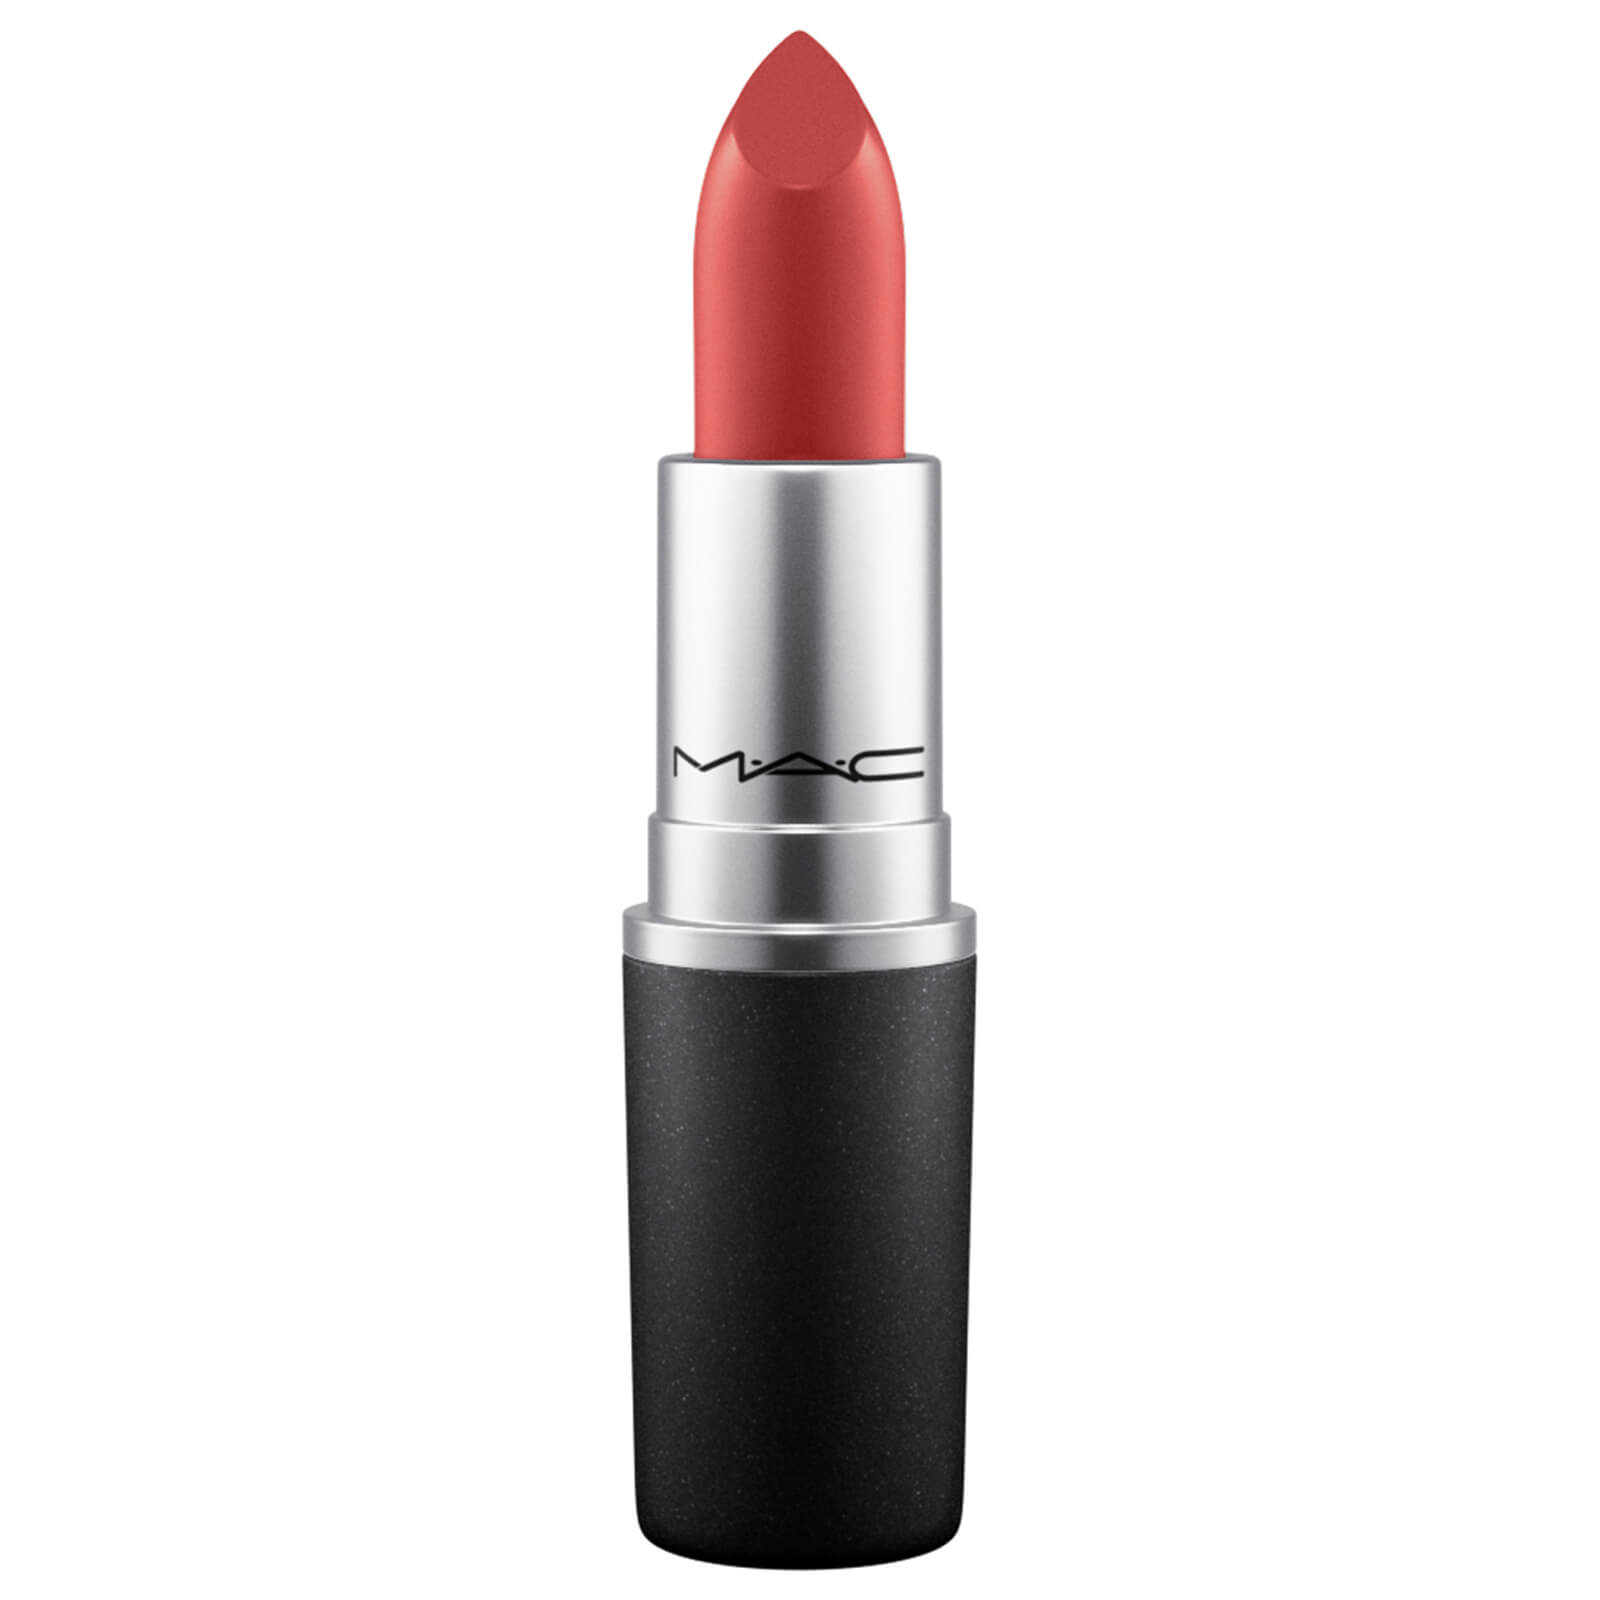 MAC Amplified Lipstick 3g (Various Shades) - Smoked Almond - Amplified